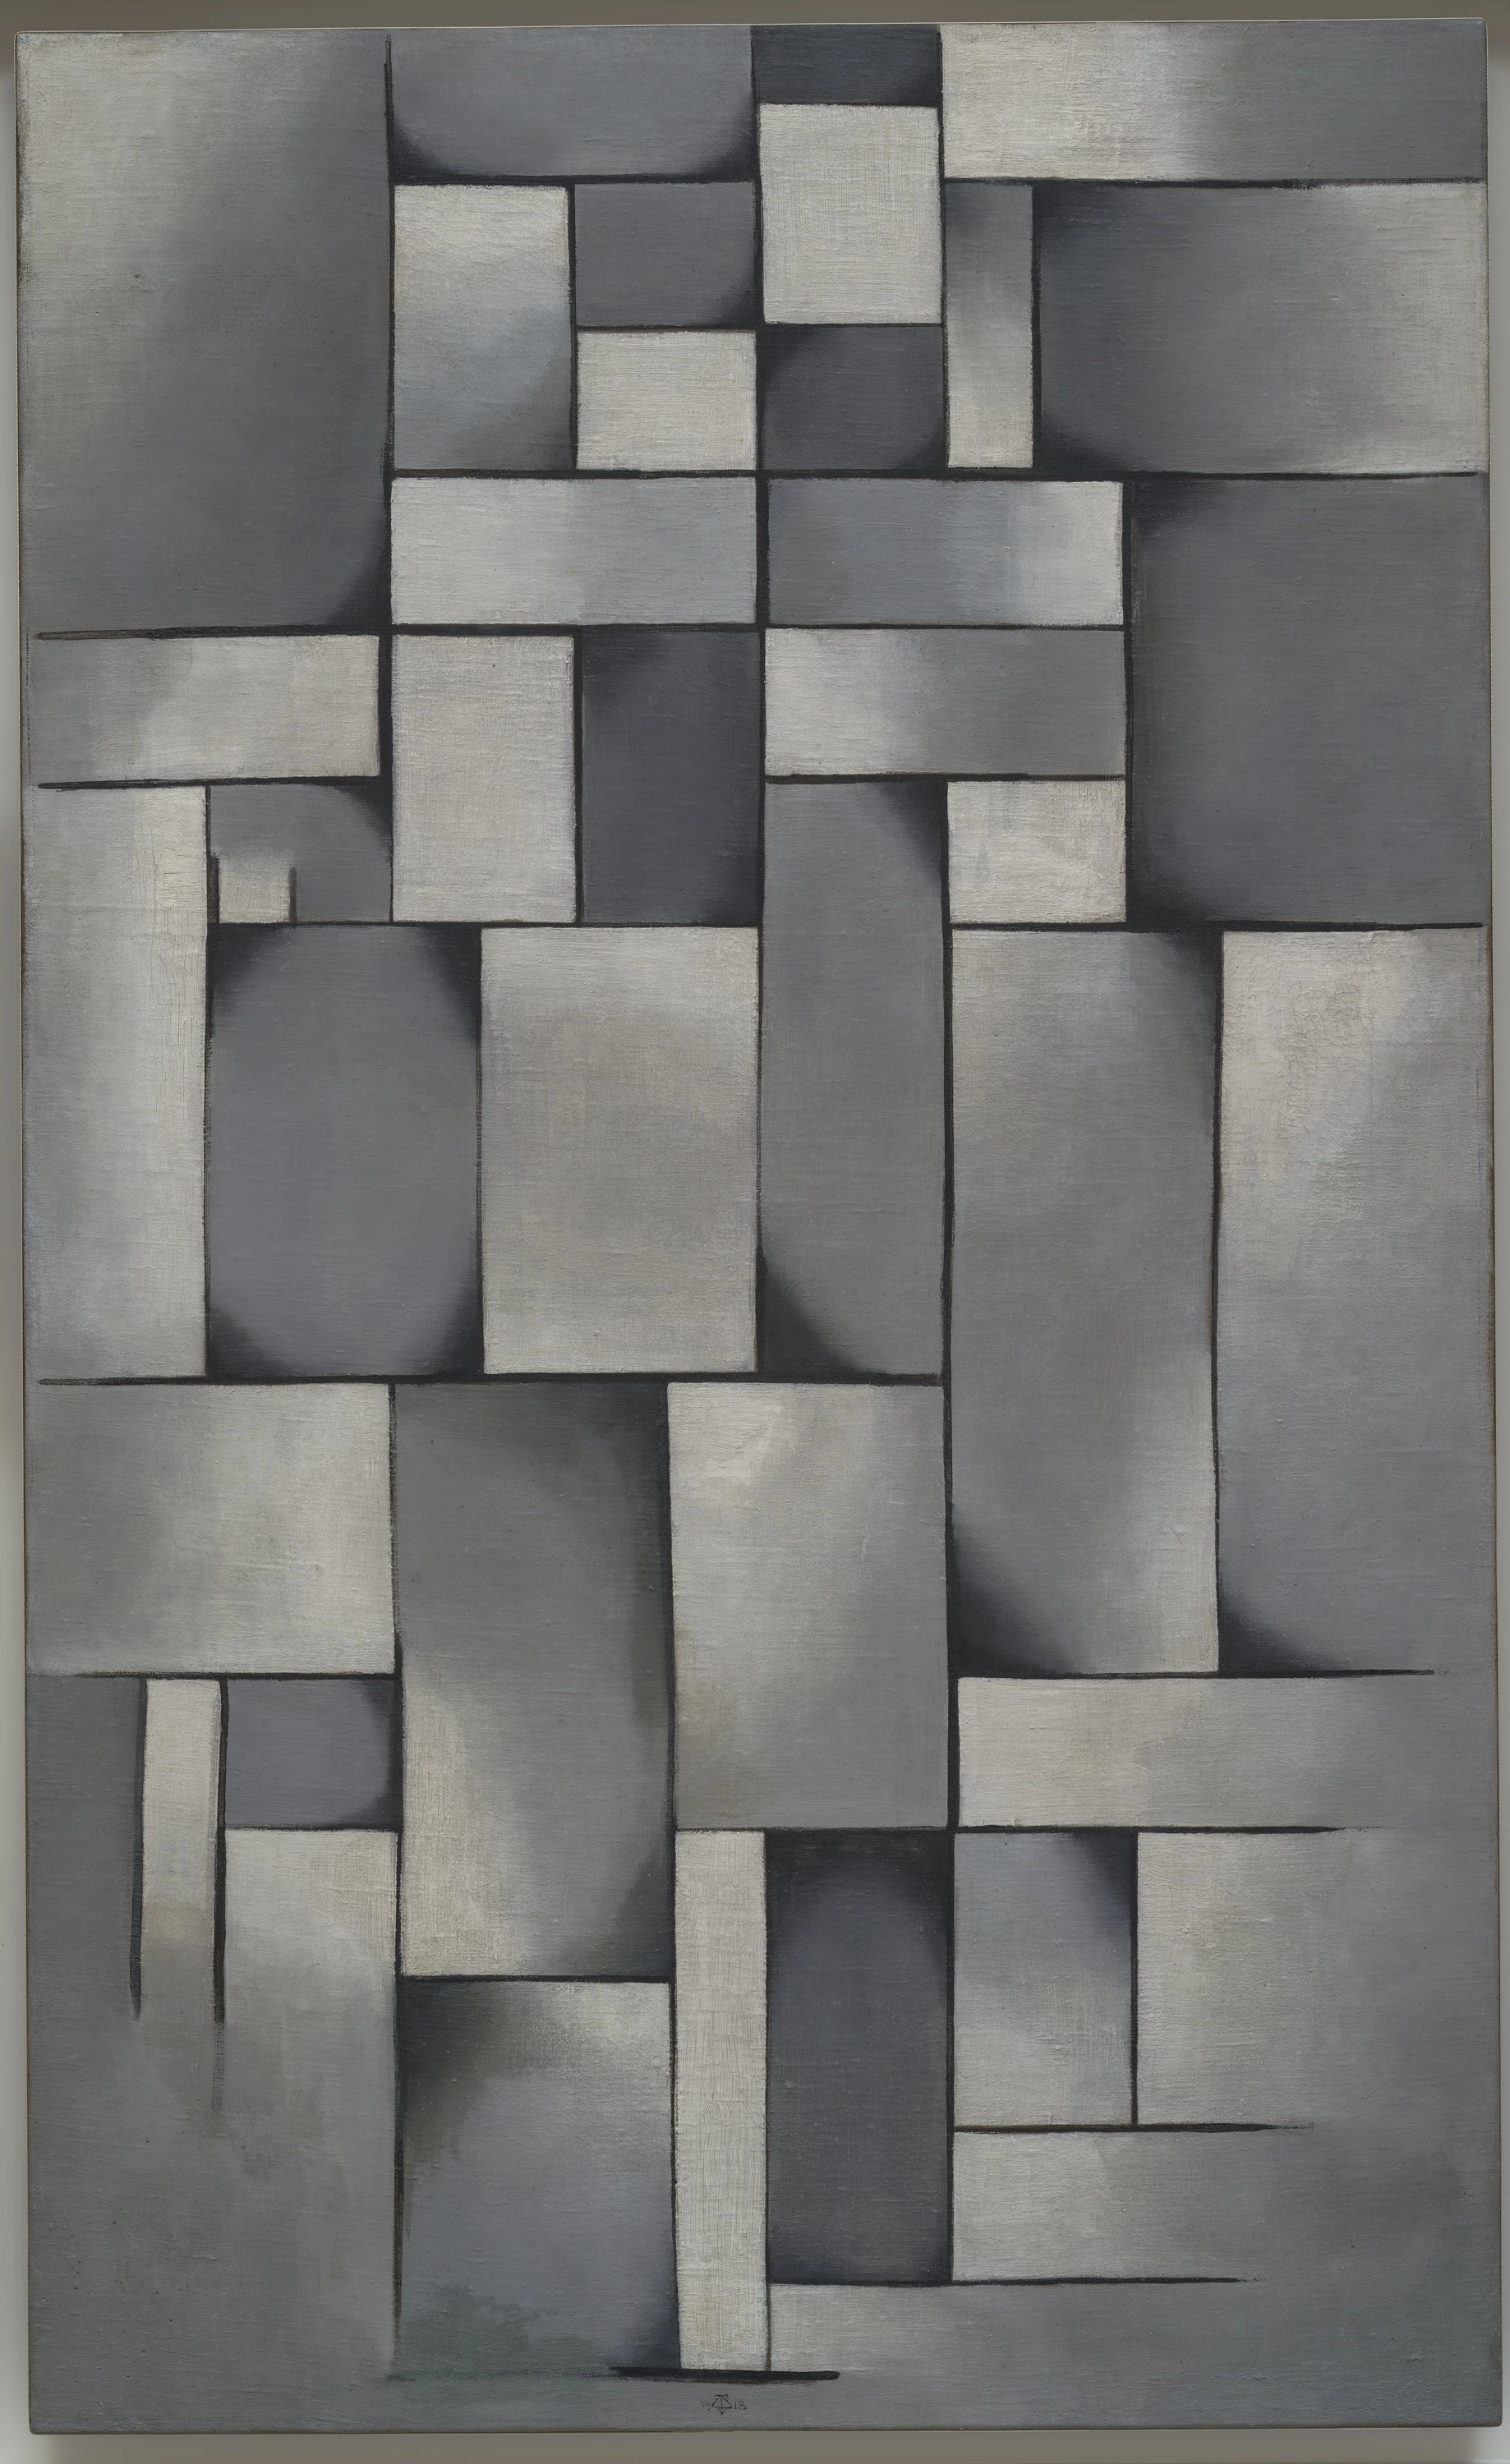 Composition in Gray (Rag-time), Theo van Doesburg